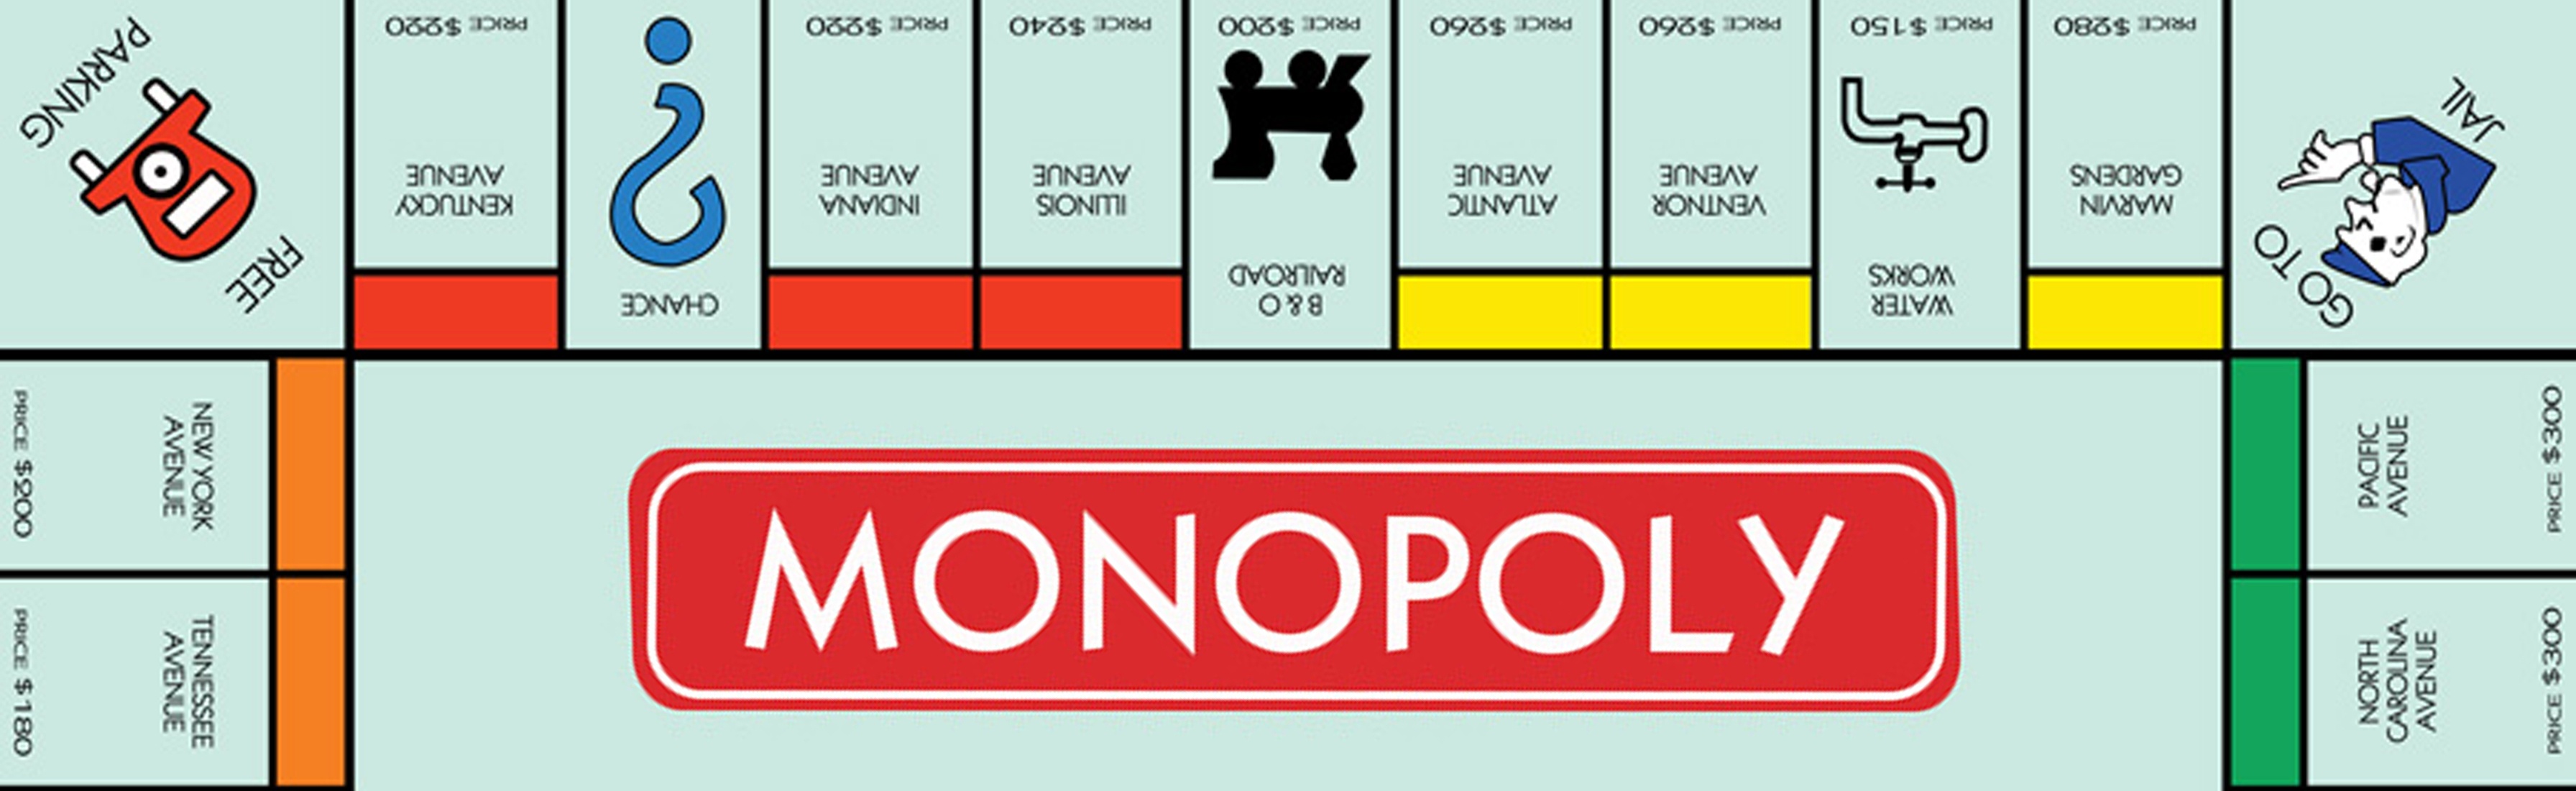 Monopoly Board Pub Crawl | Raiders Of The Lost Pubs - Get Out Of Jail Free Card Printable